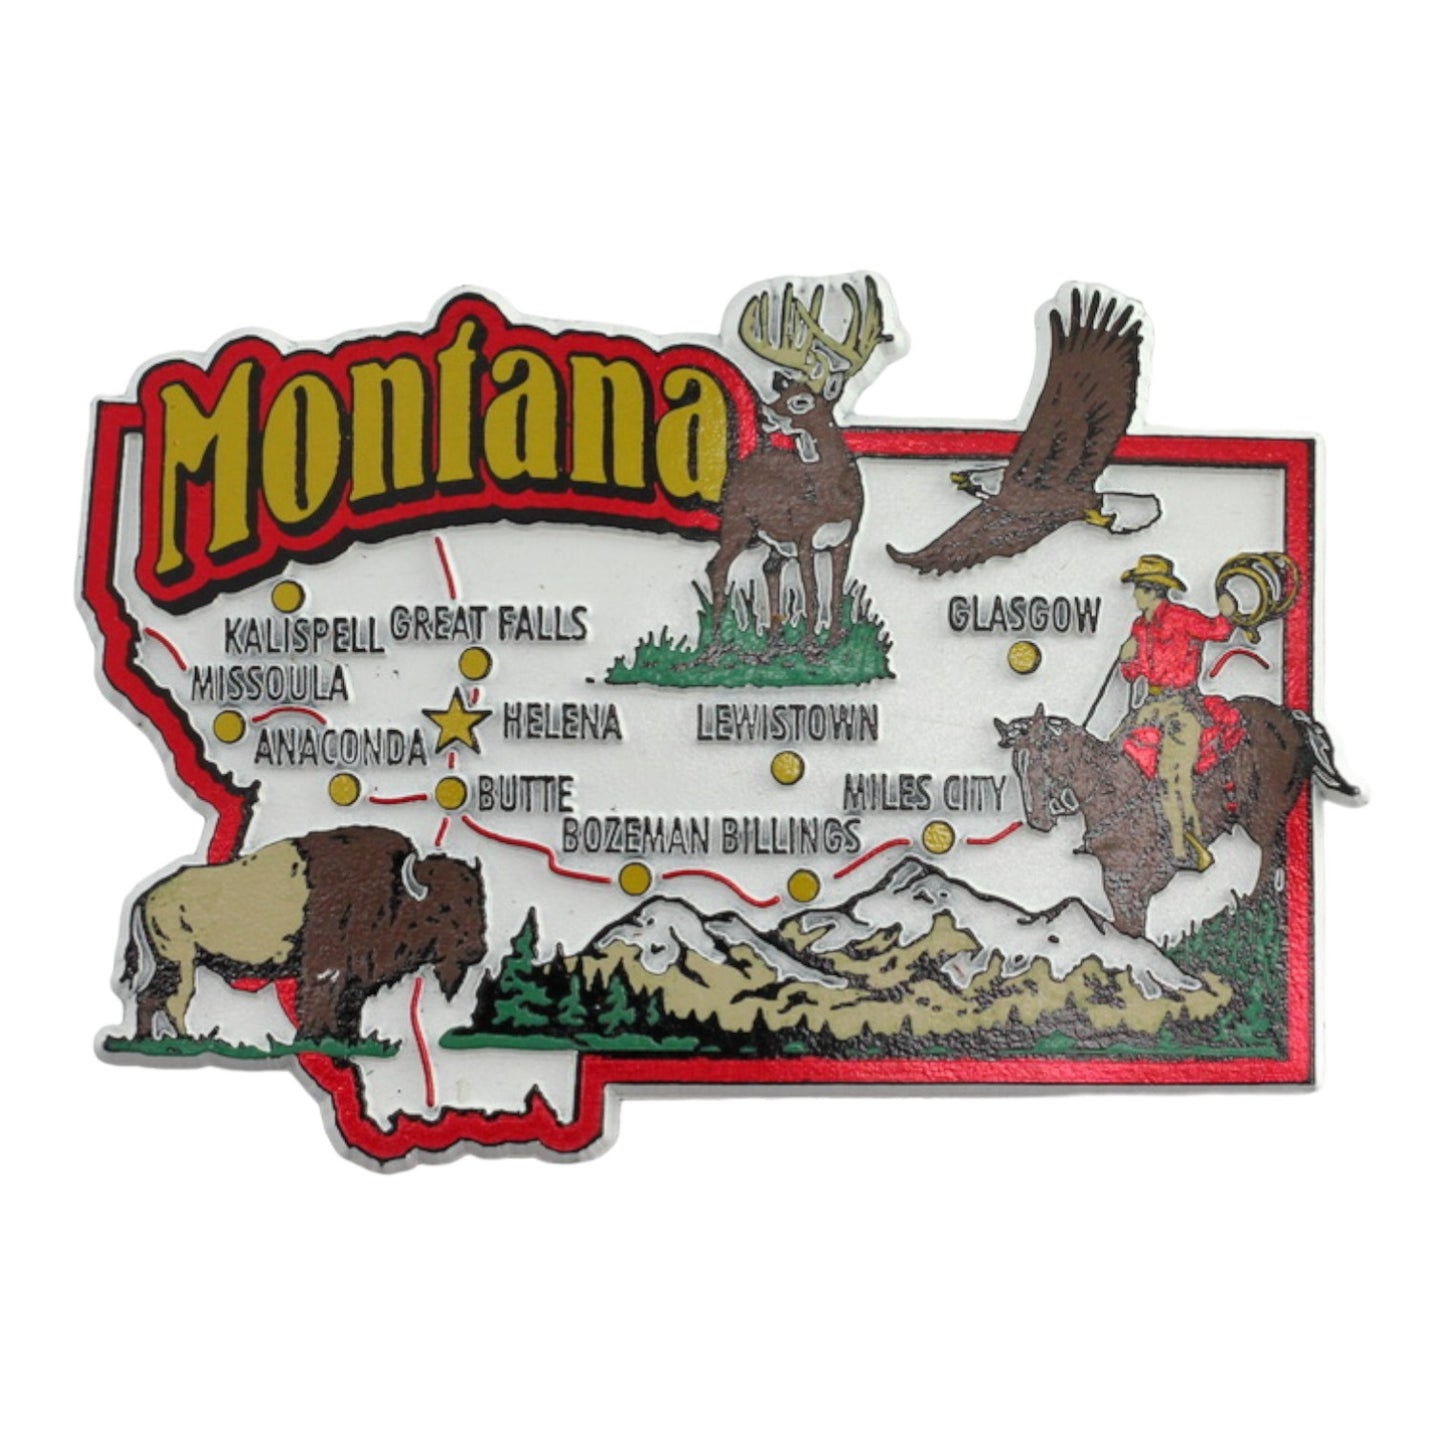 Montana State Map and Landmarks Collage Fridge Souvenir Collectible Magnet